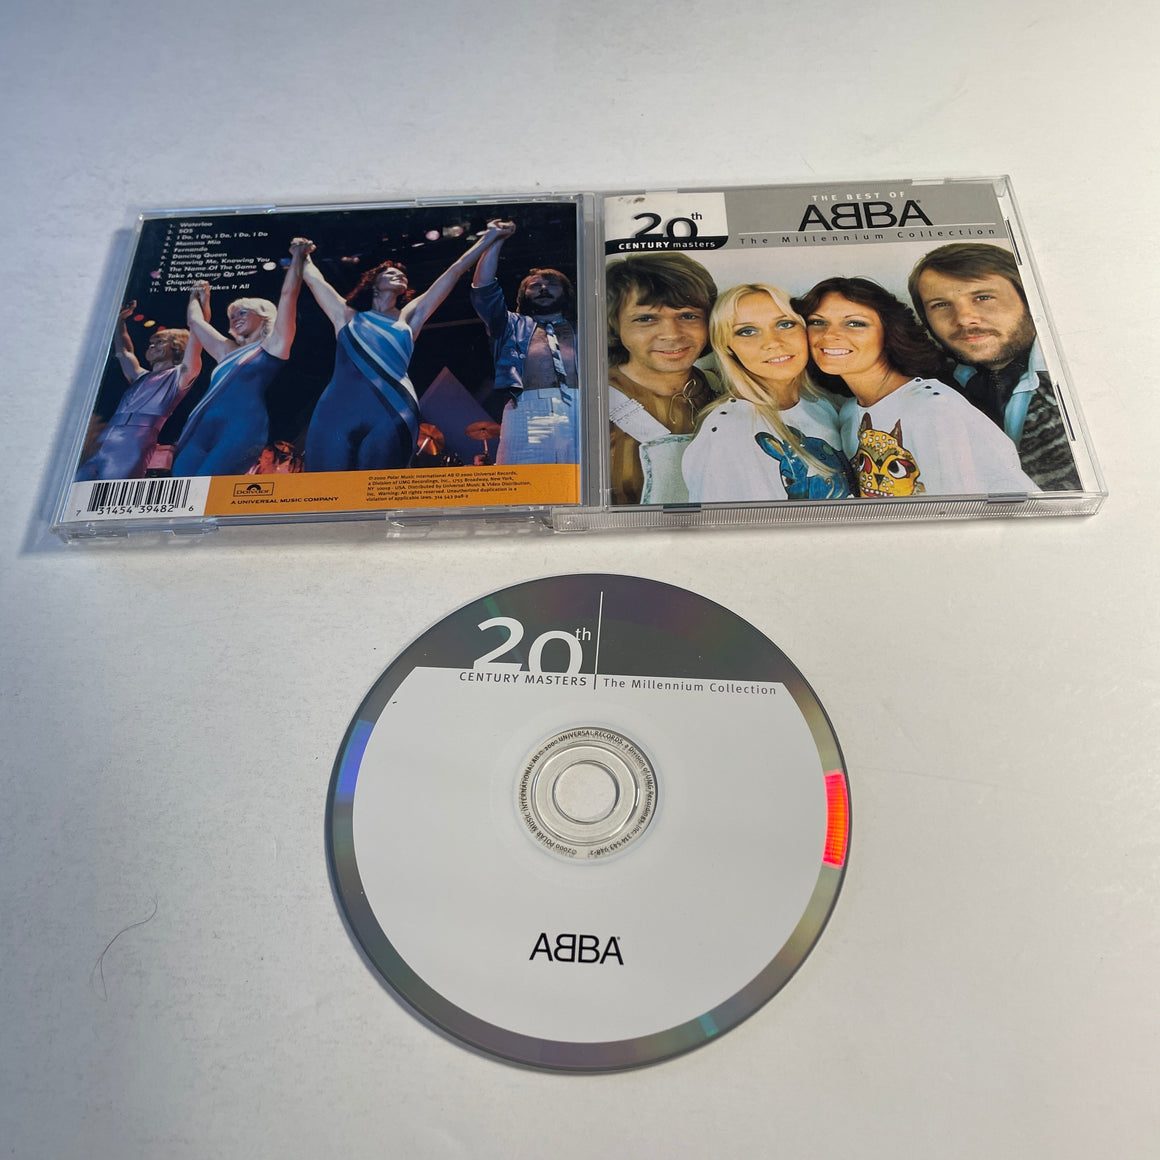 ABBA The Best Of ABBA Used CD VG+\VG+